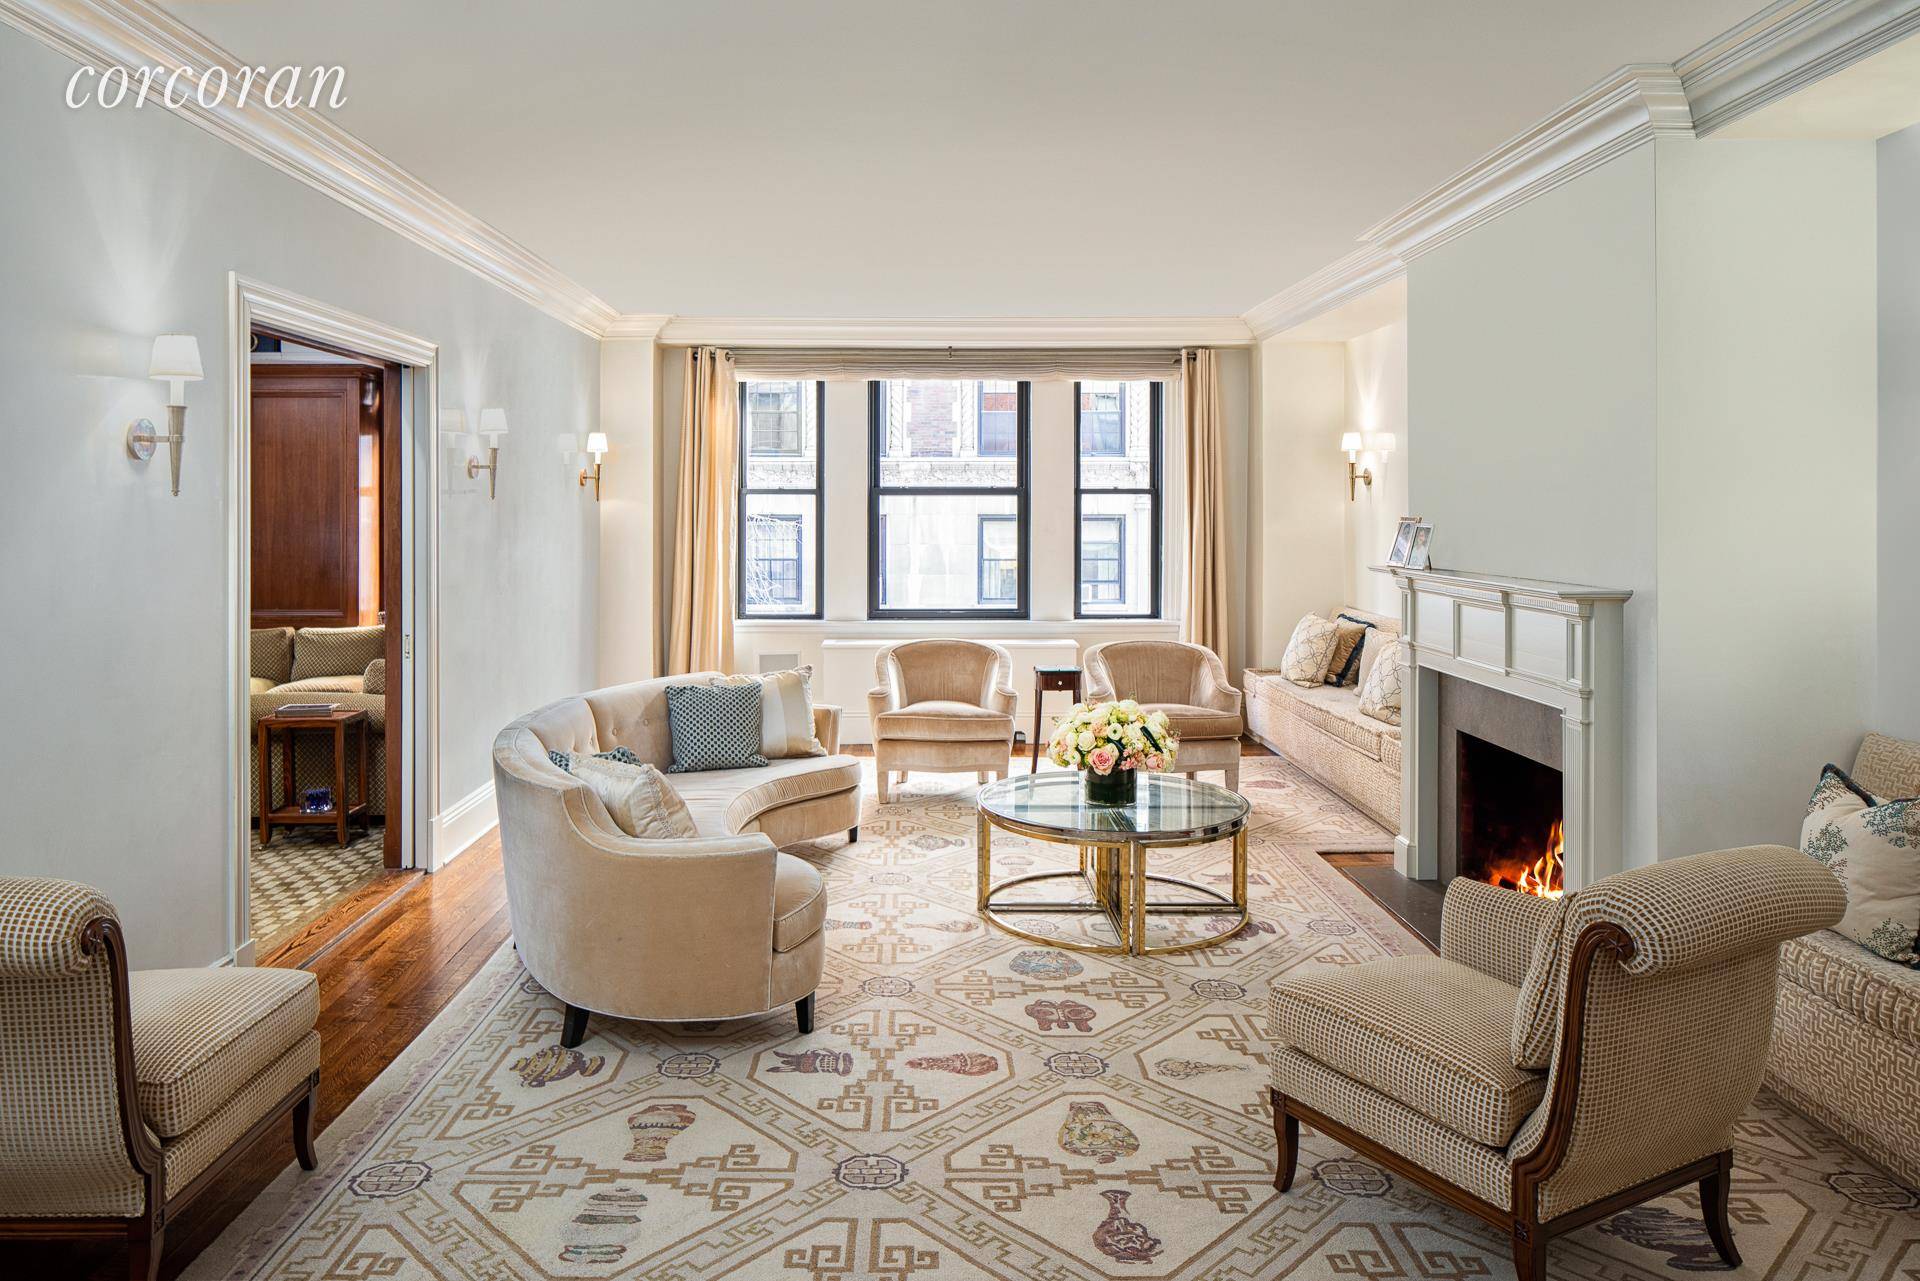 This mint prewar Park Avenue residence has five bedrooms and five renovated bathrooms, and is located in one of Carnegie Hill's premier co operatives designed by Emery Roth.